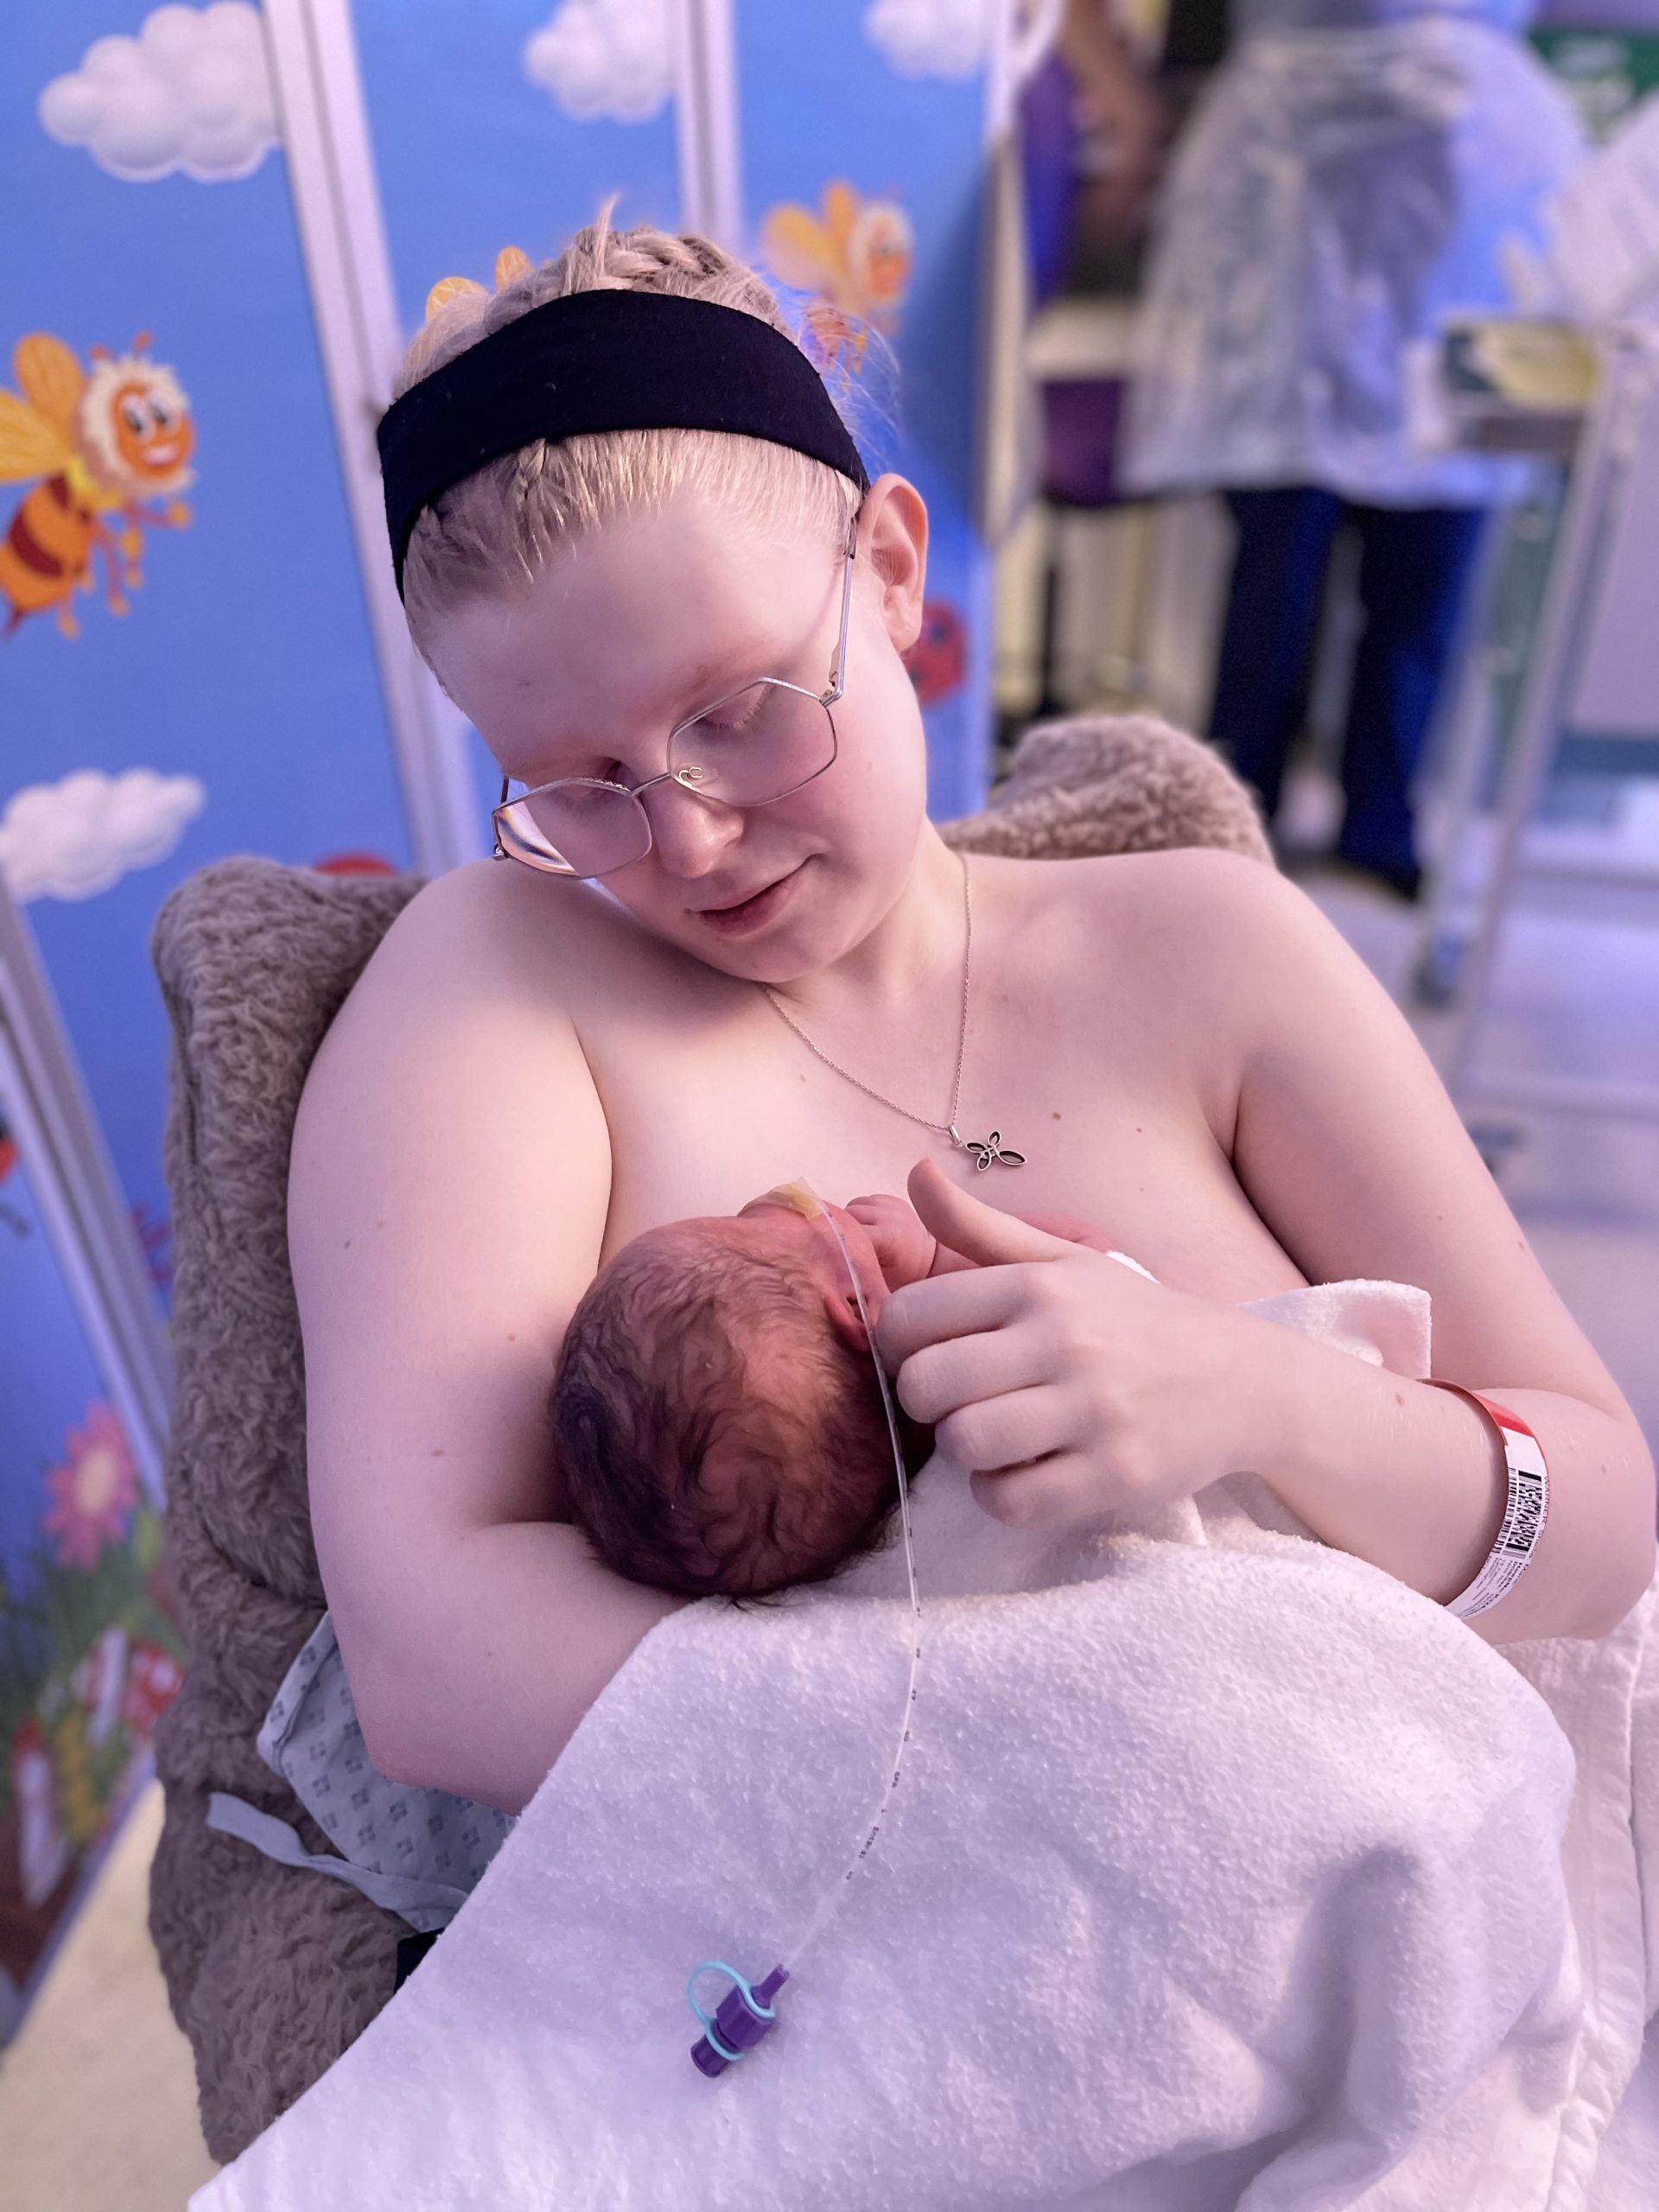 Shellie breastfeeding baby Adonis who has Down syndrome